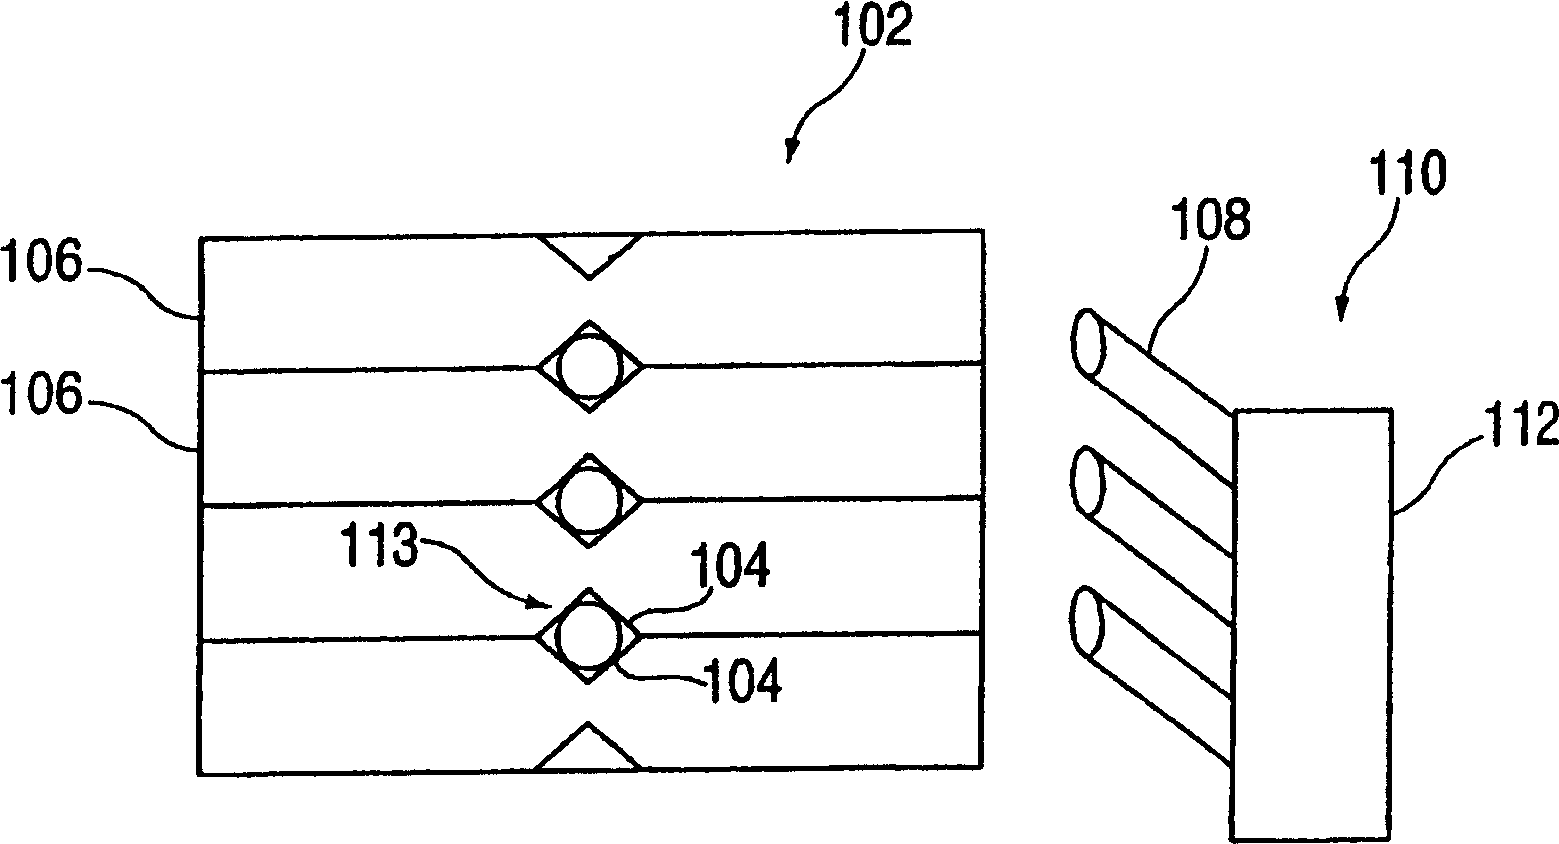 Non-inserted core optical fiber equipment used for optical back plate connecting system